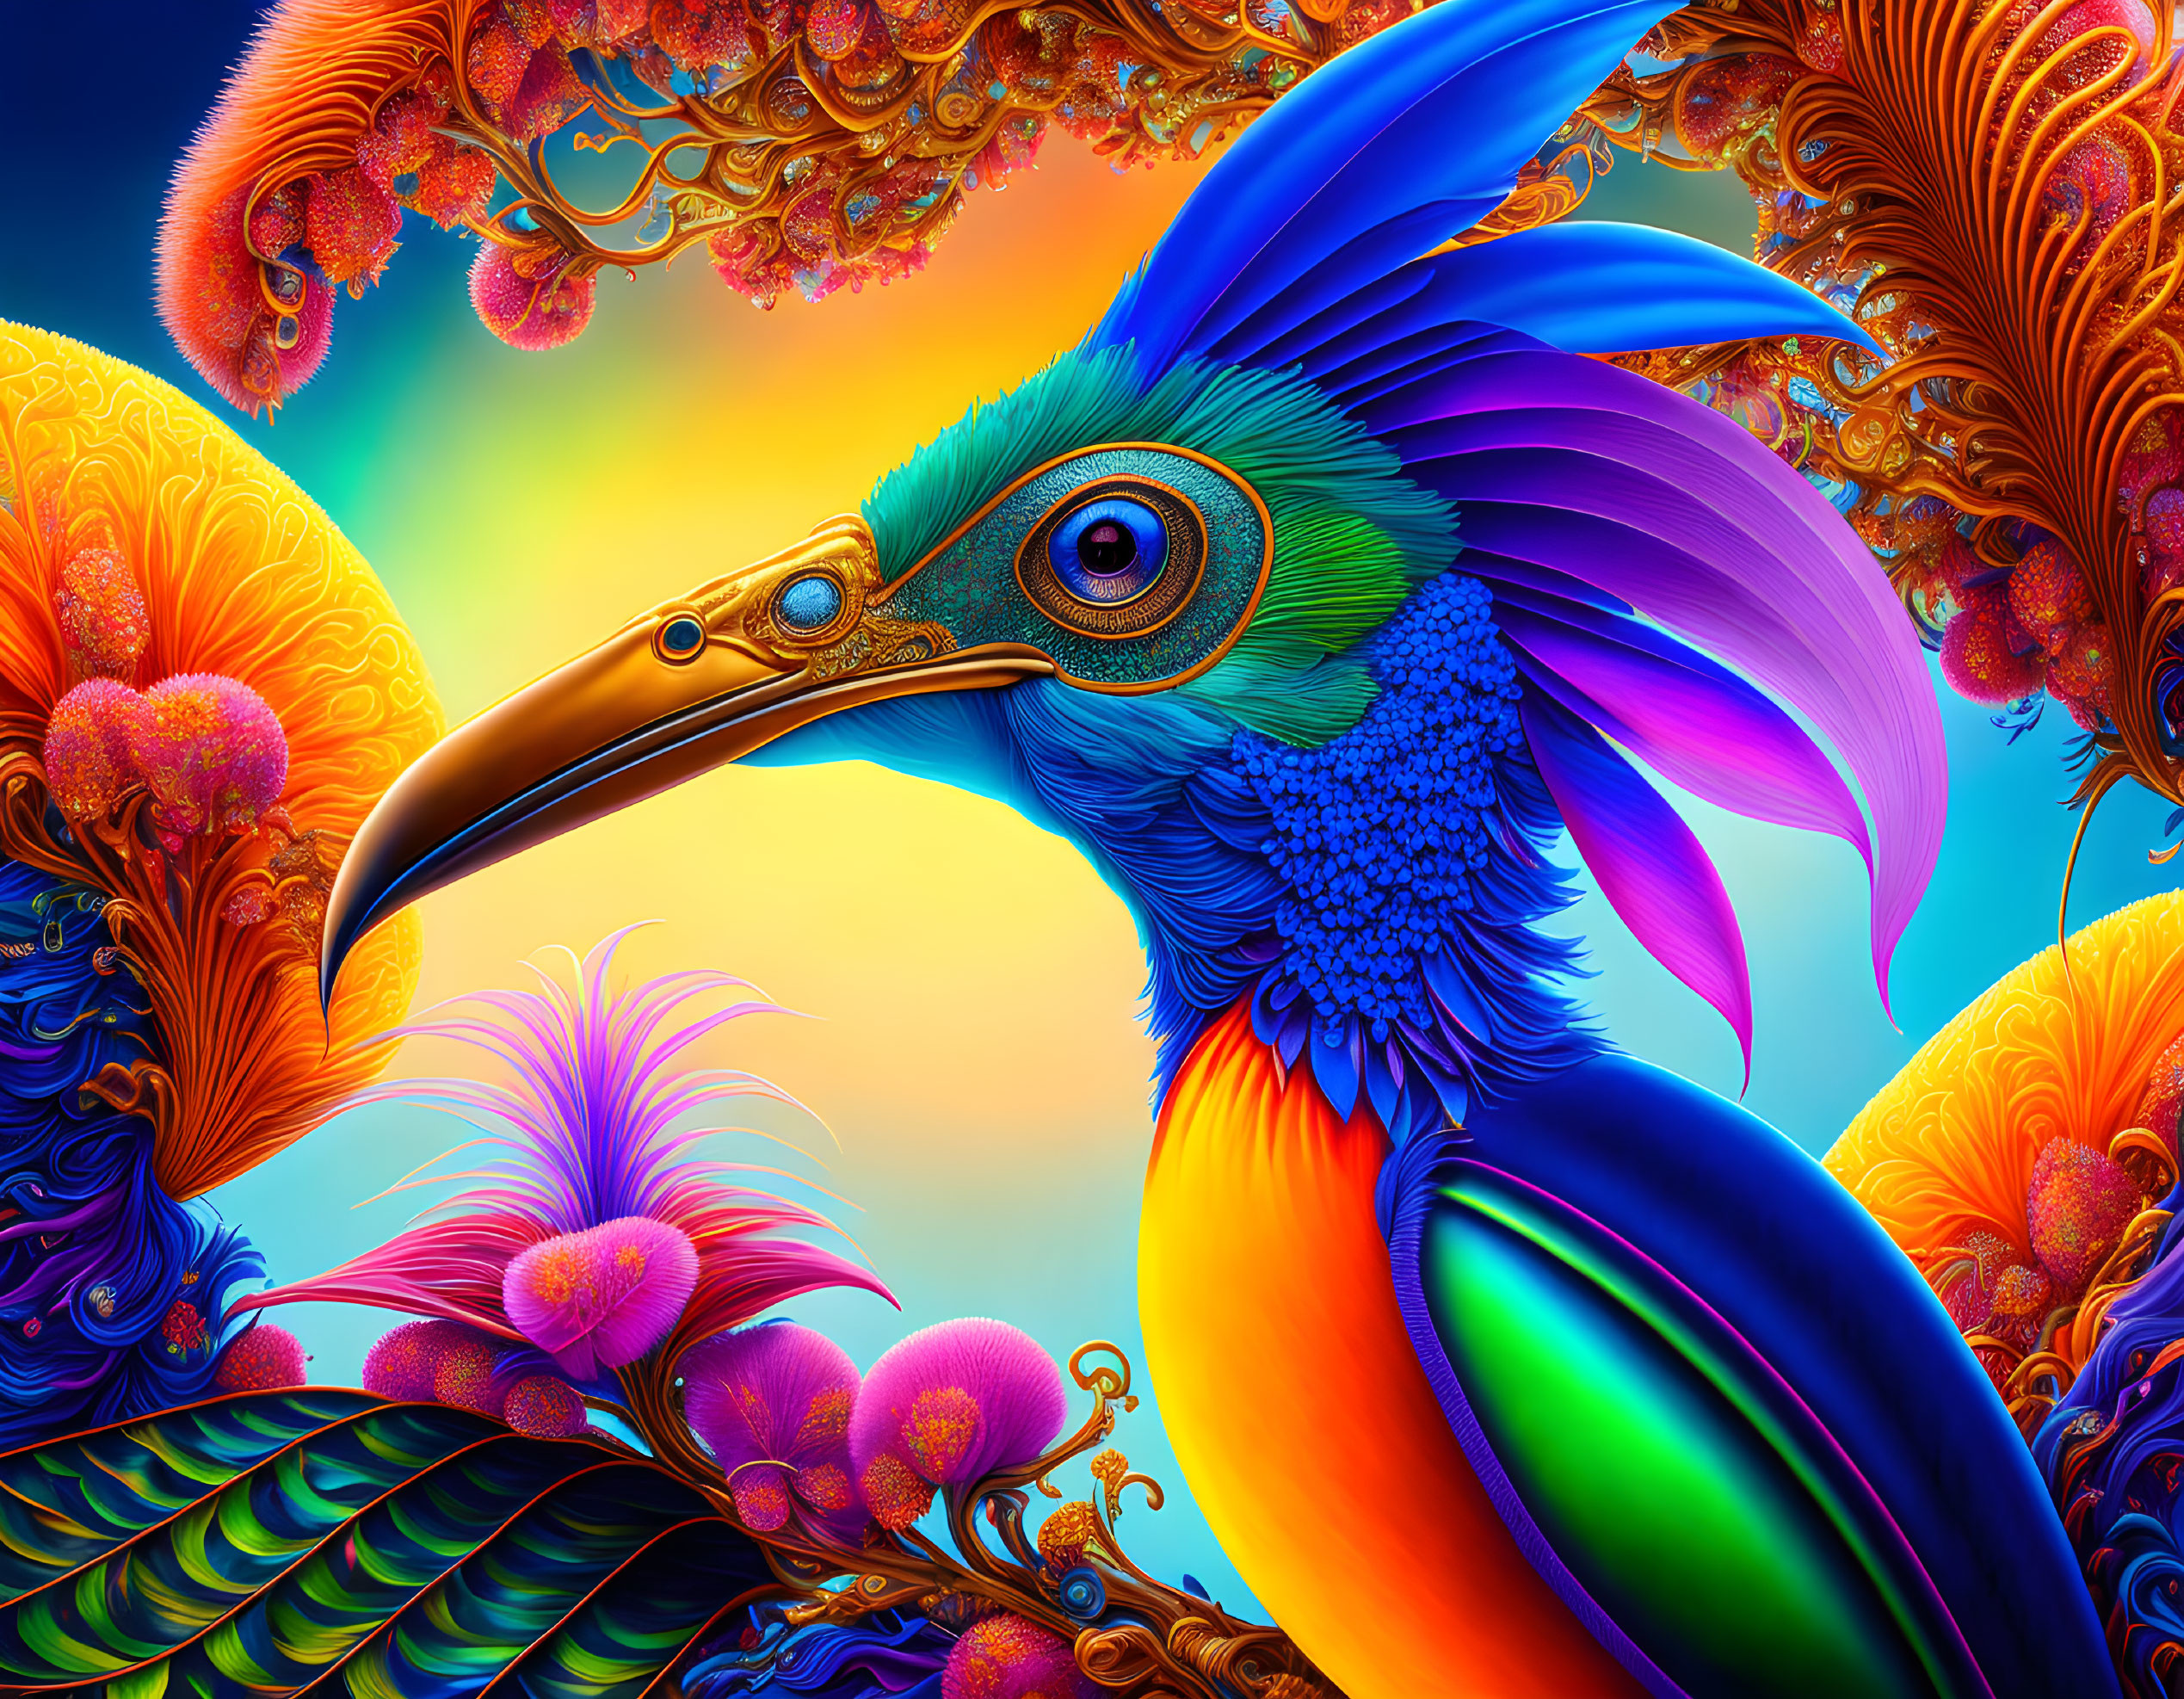 Colorful digital artwork of fantastical bird with long beak and intricate feather patterns